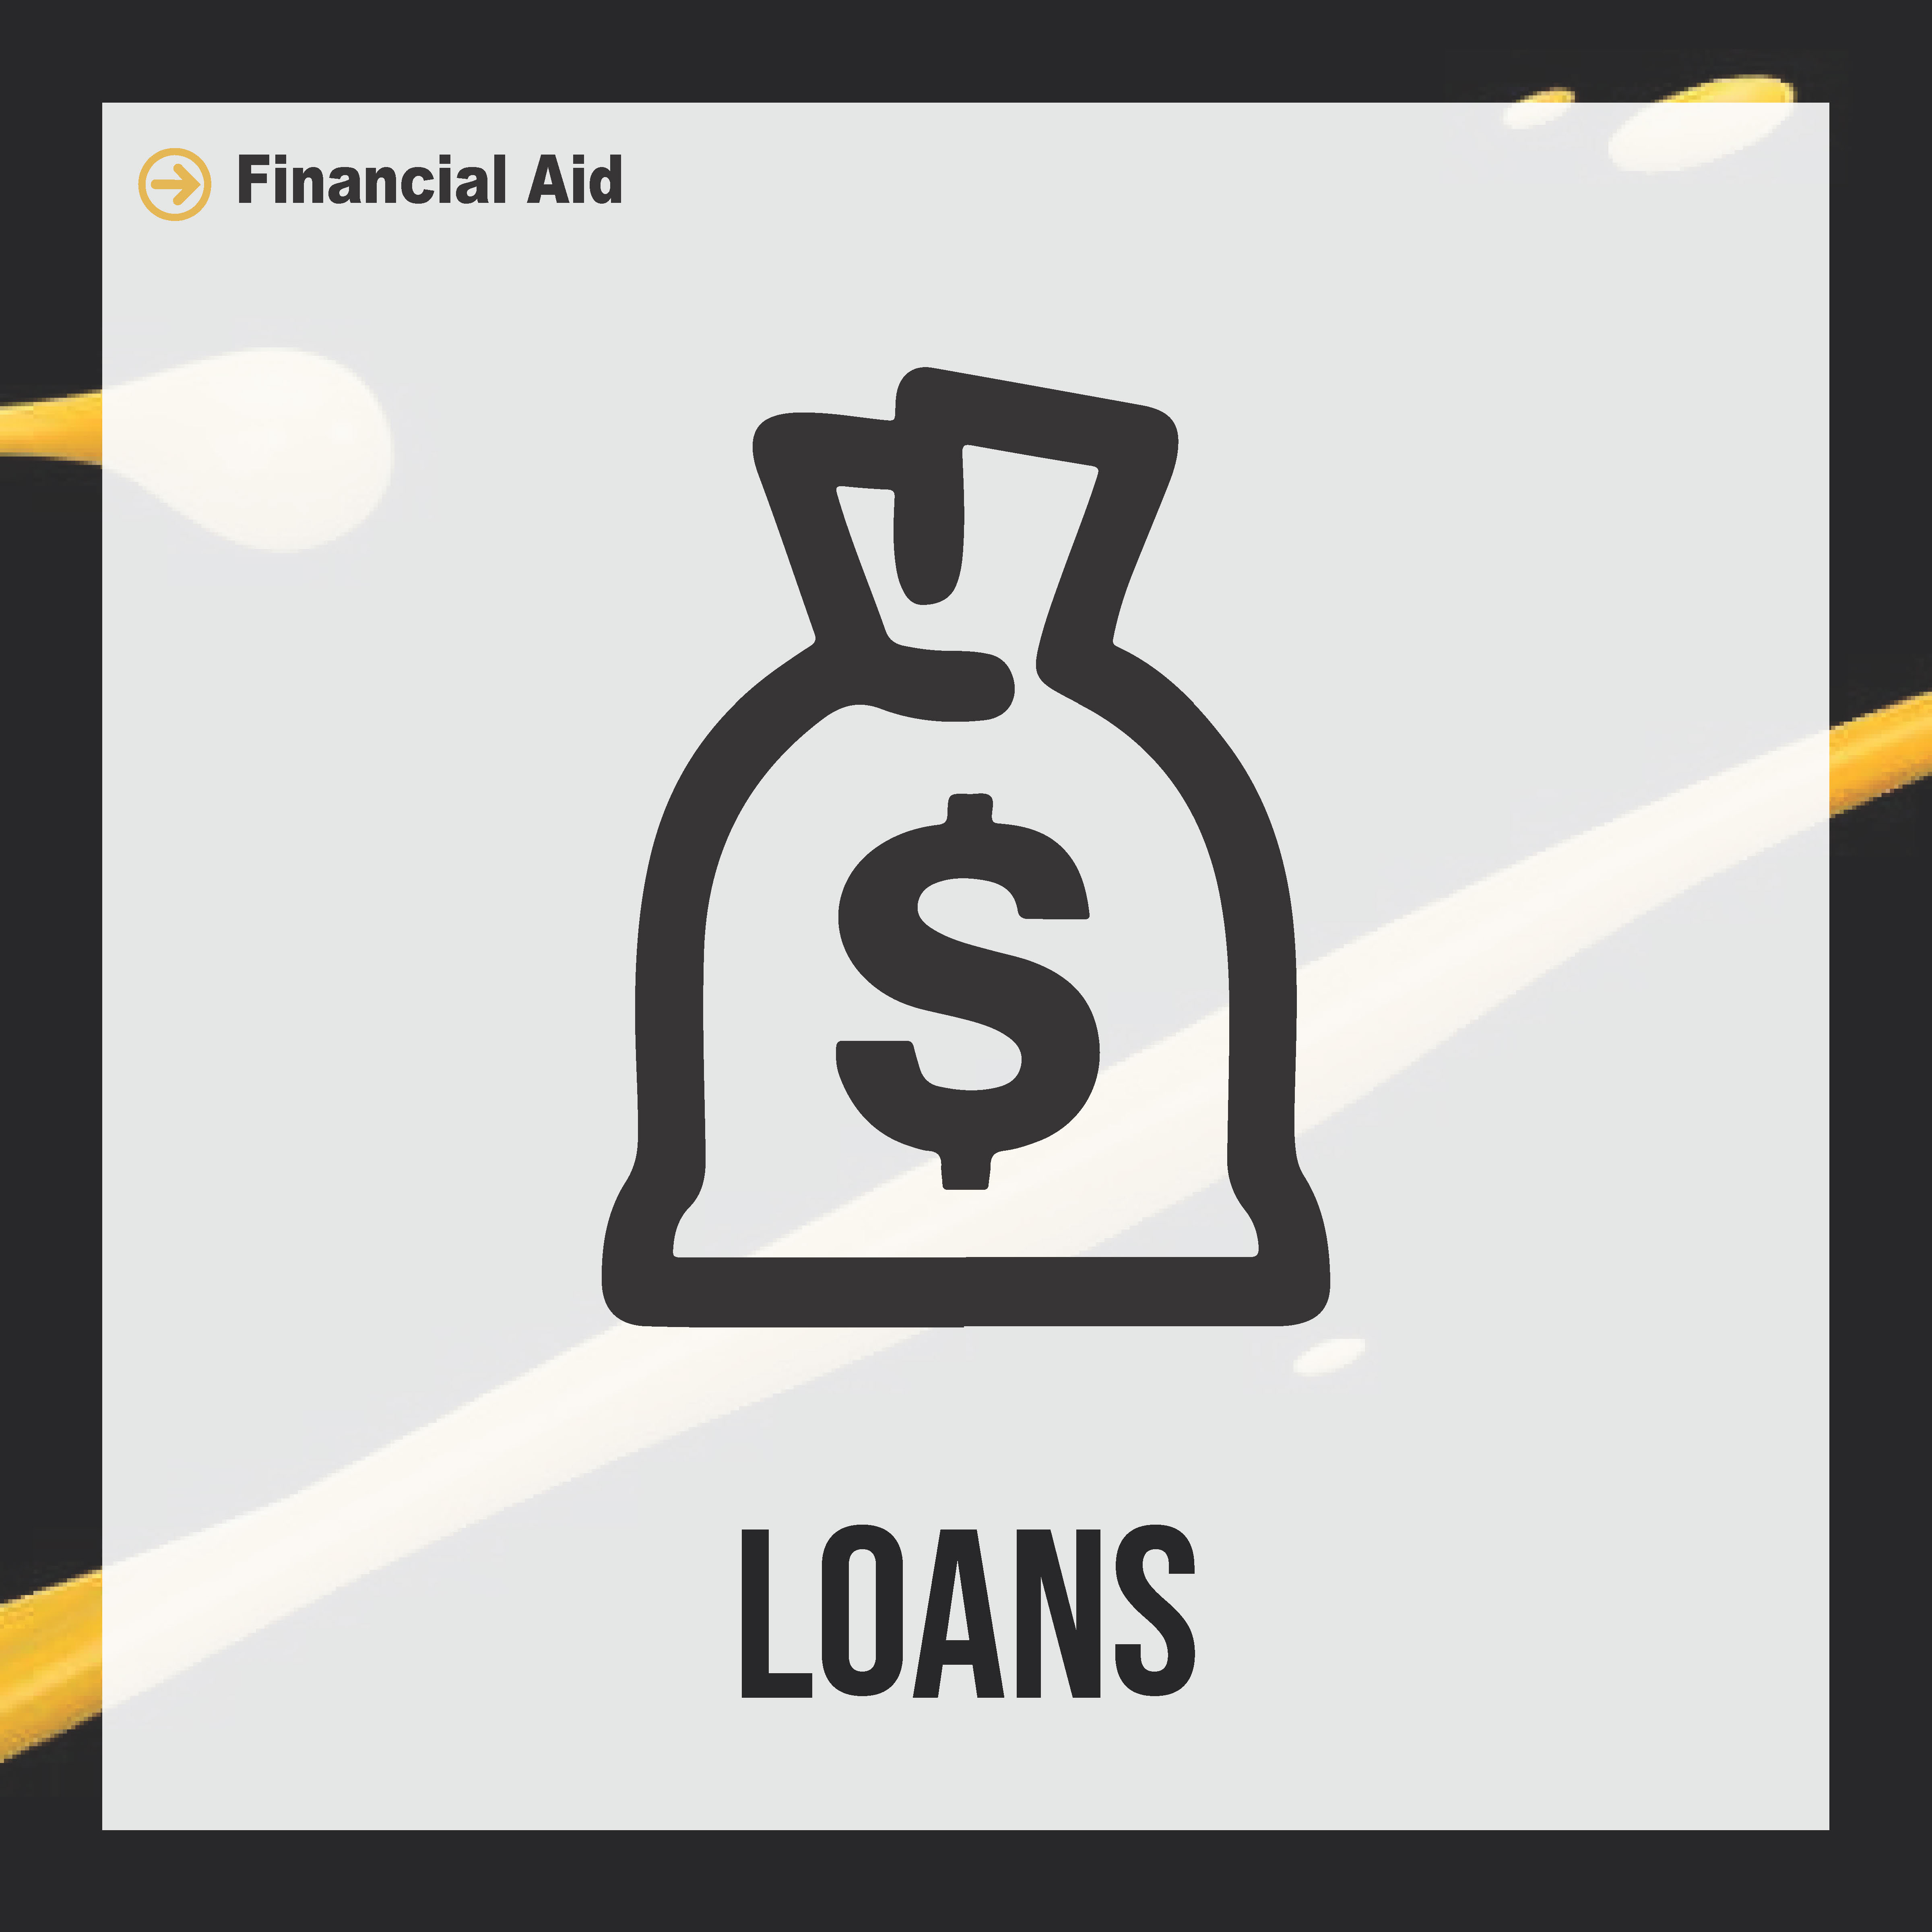 Financial Aid Loans (with circles and arrows)